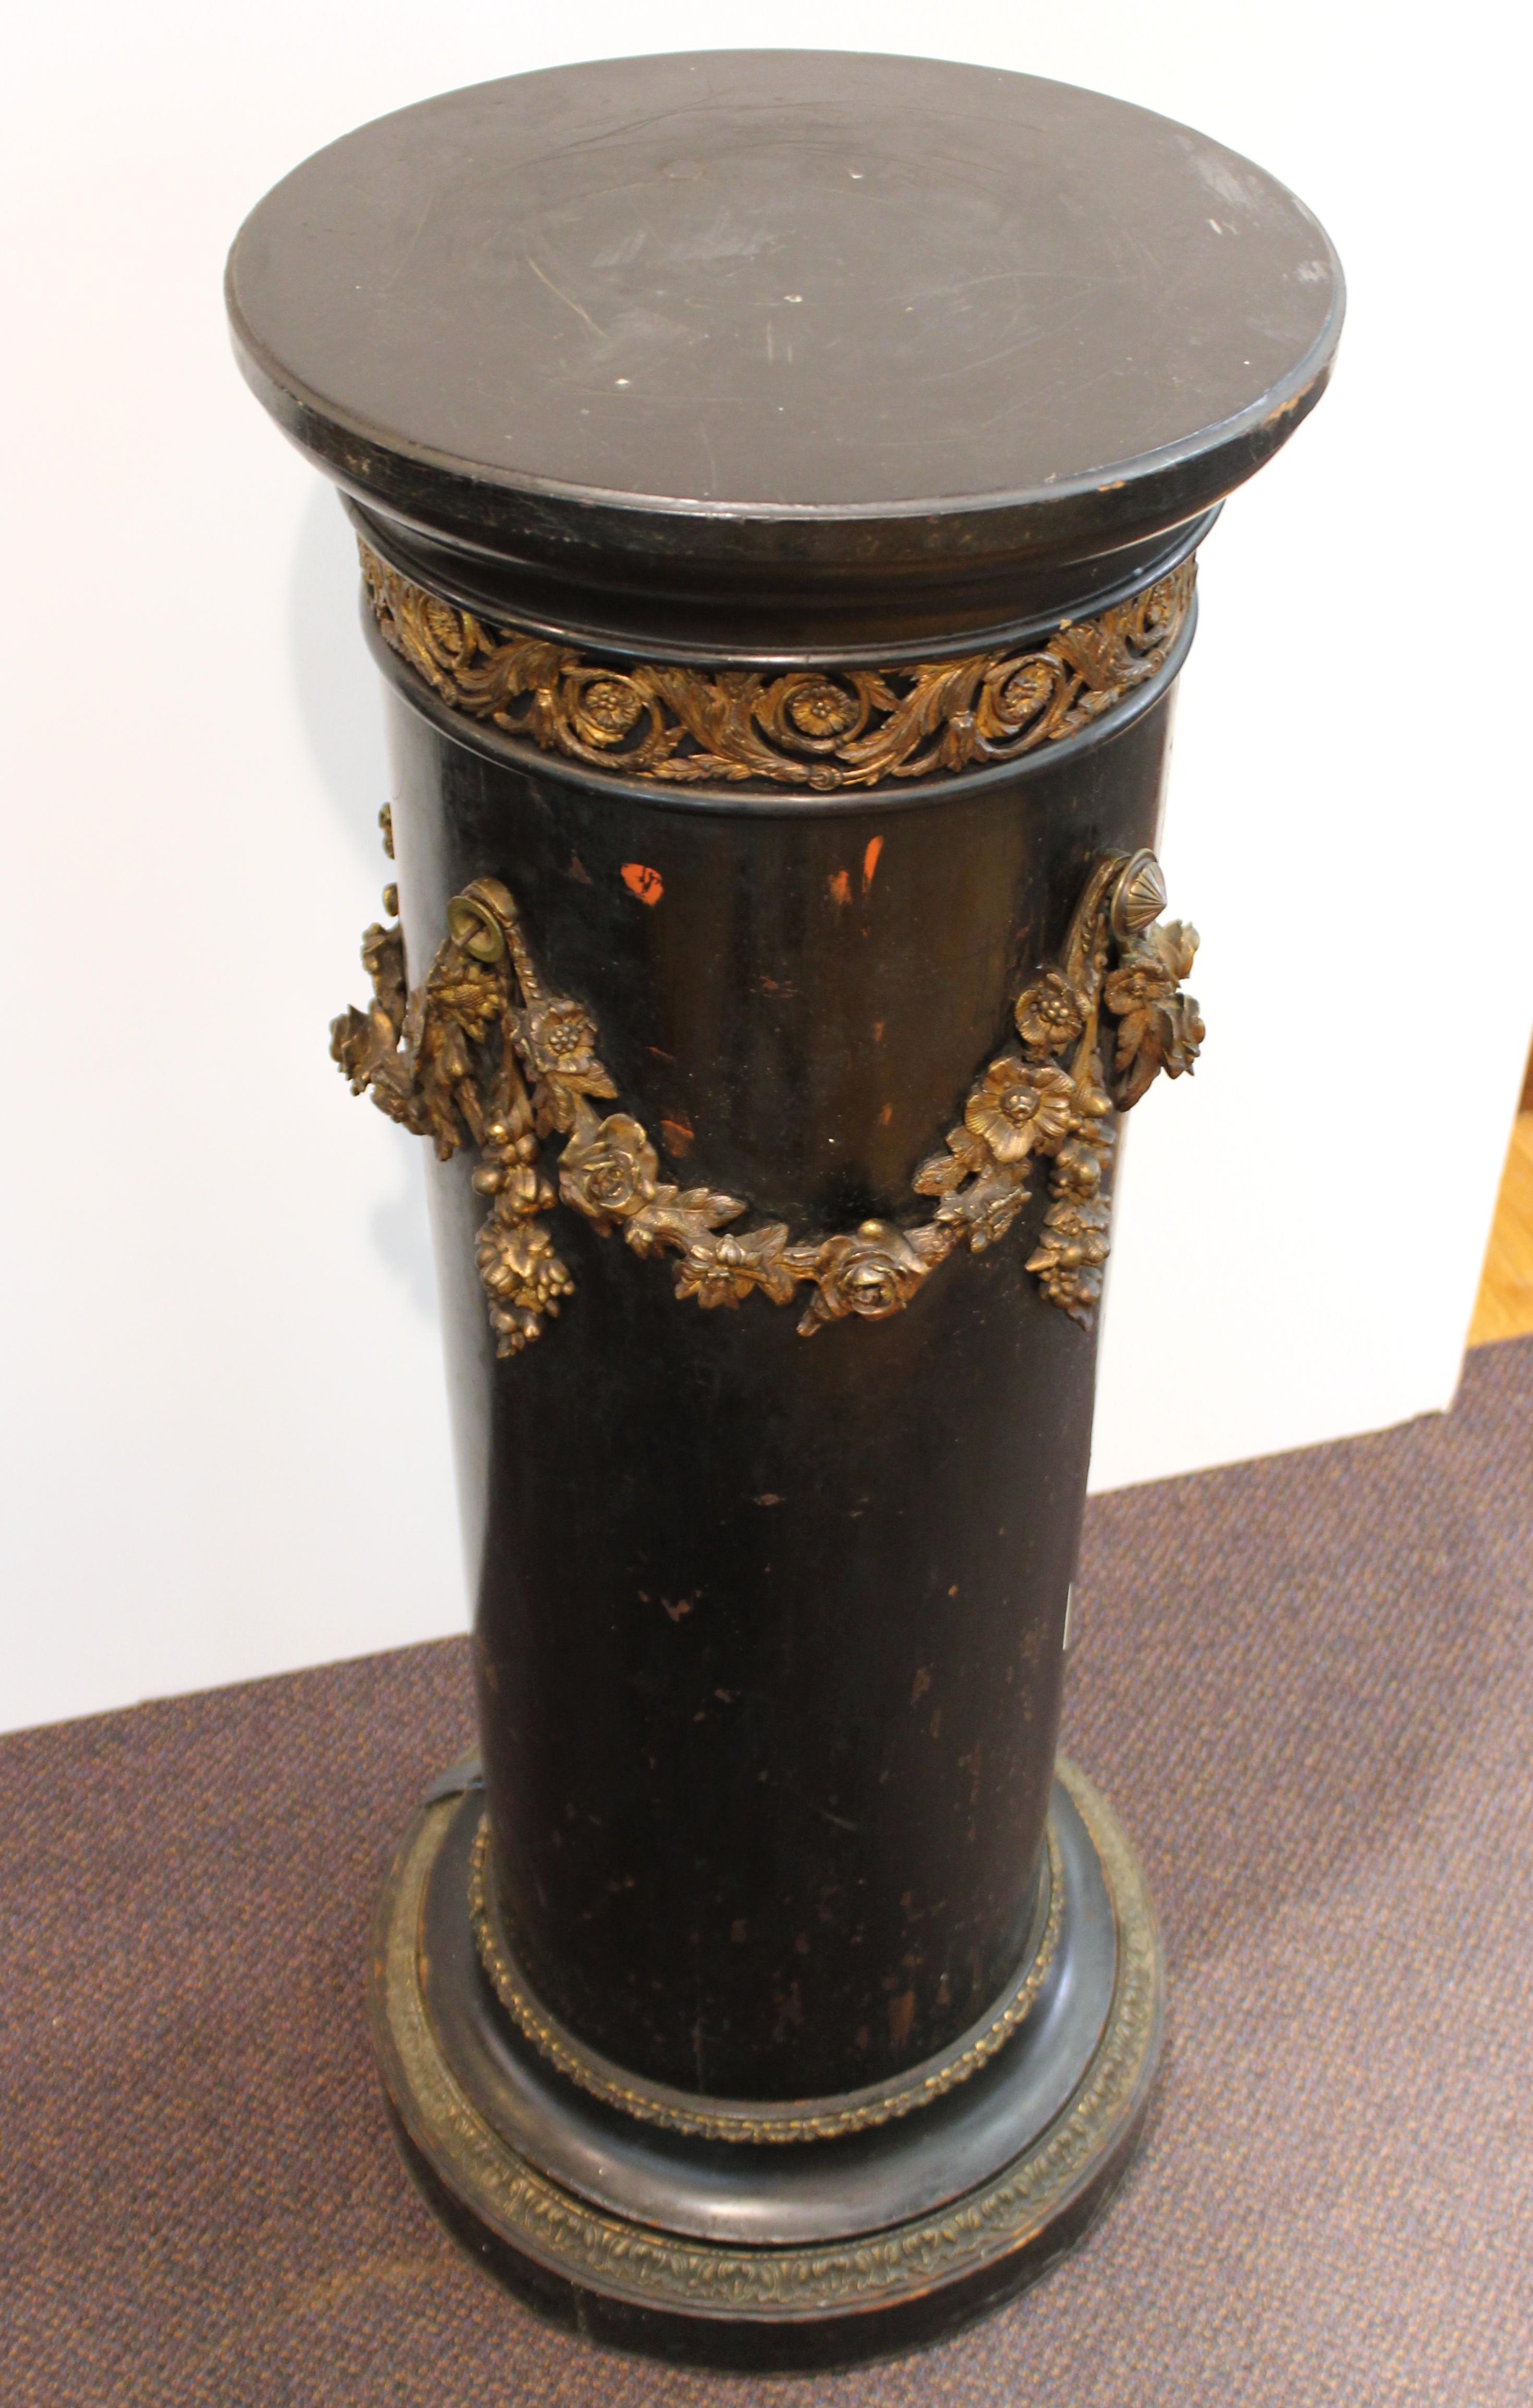 French Belle Époque column or pedestal in ebonized wood, with decorative ormolu floral garlands and friezes on the base and top. The piece was made in France during the 1890s and is in great vintage condition with age-appropriate wear.